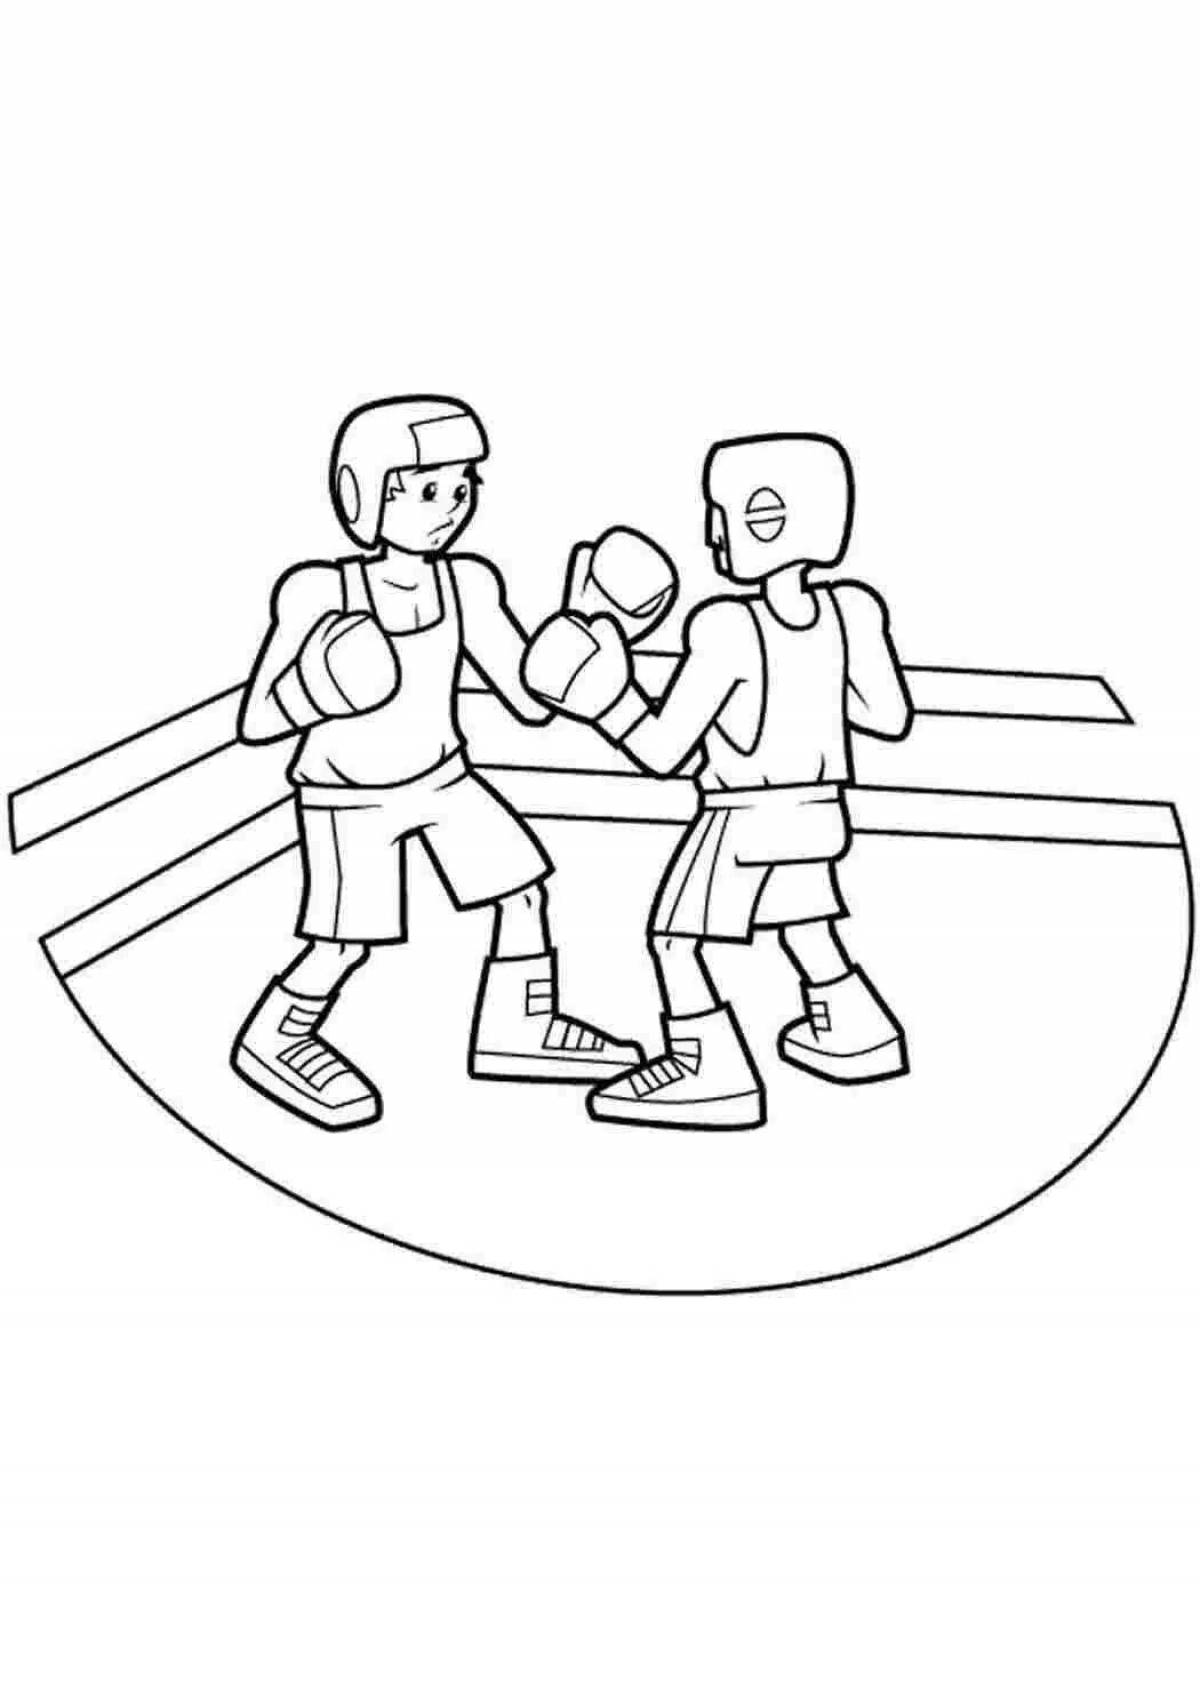 Adorable boxing coloring book for kids